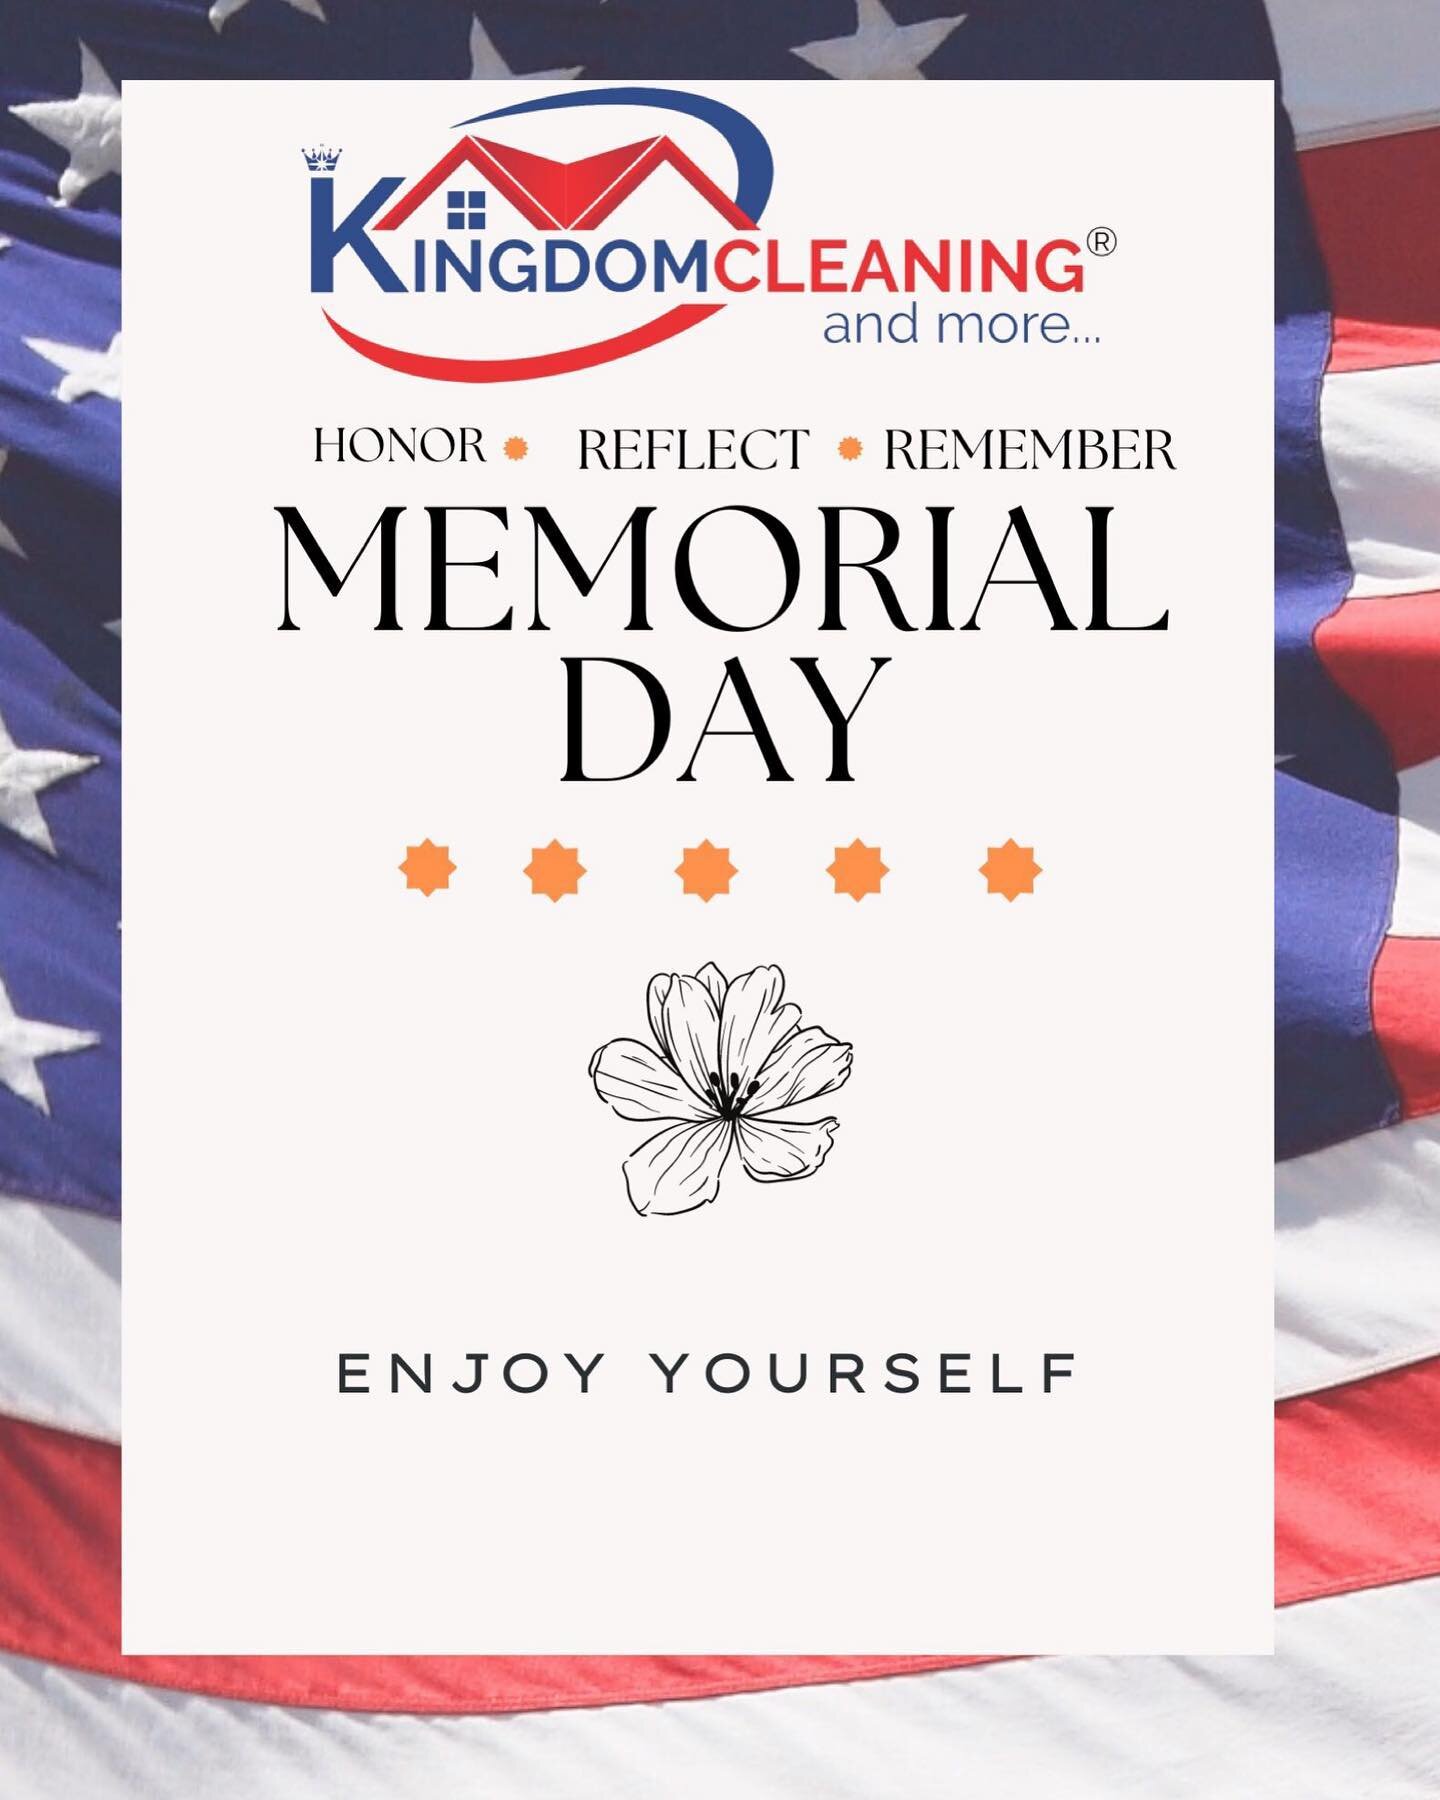 🇺🇸Enjoy your weekend, but I want you to know that I will be remembering what this holiday is about.🌸
🇺🇸Kingdom Cleaning and More🇺🇸